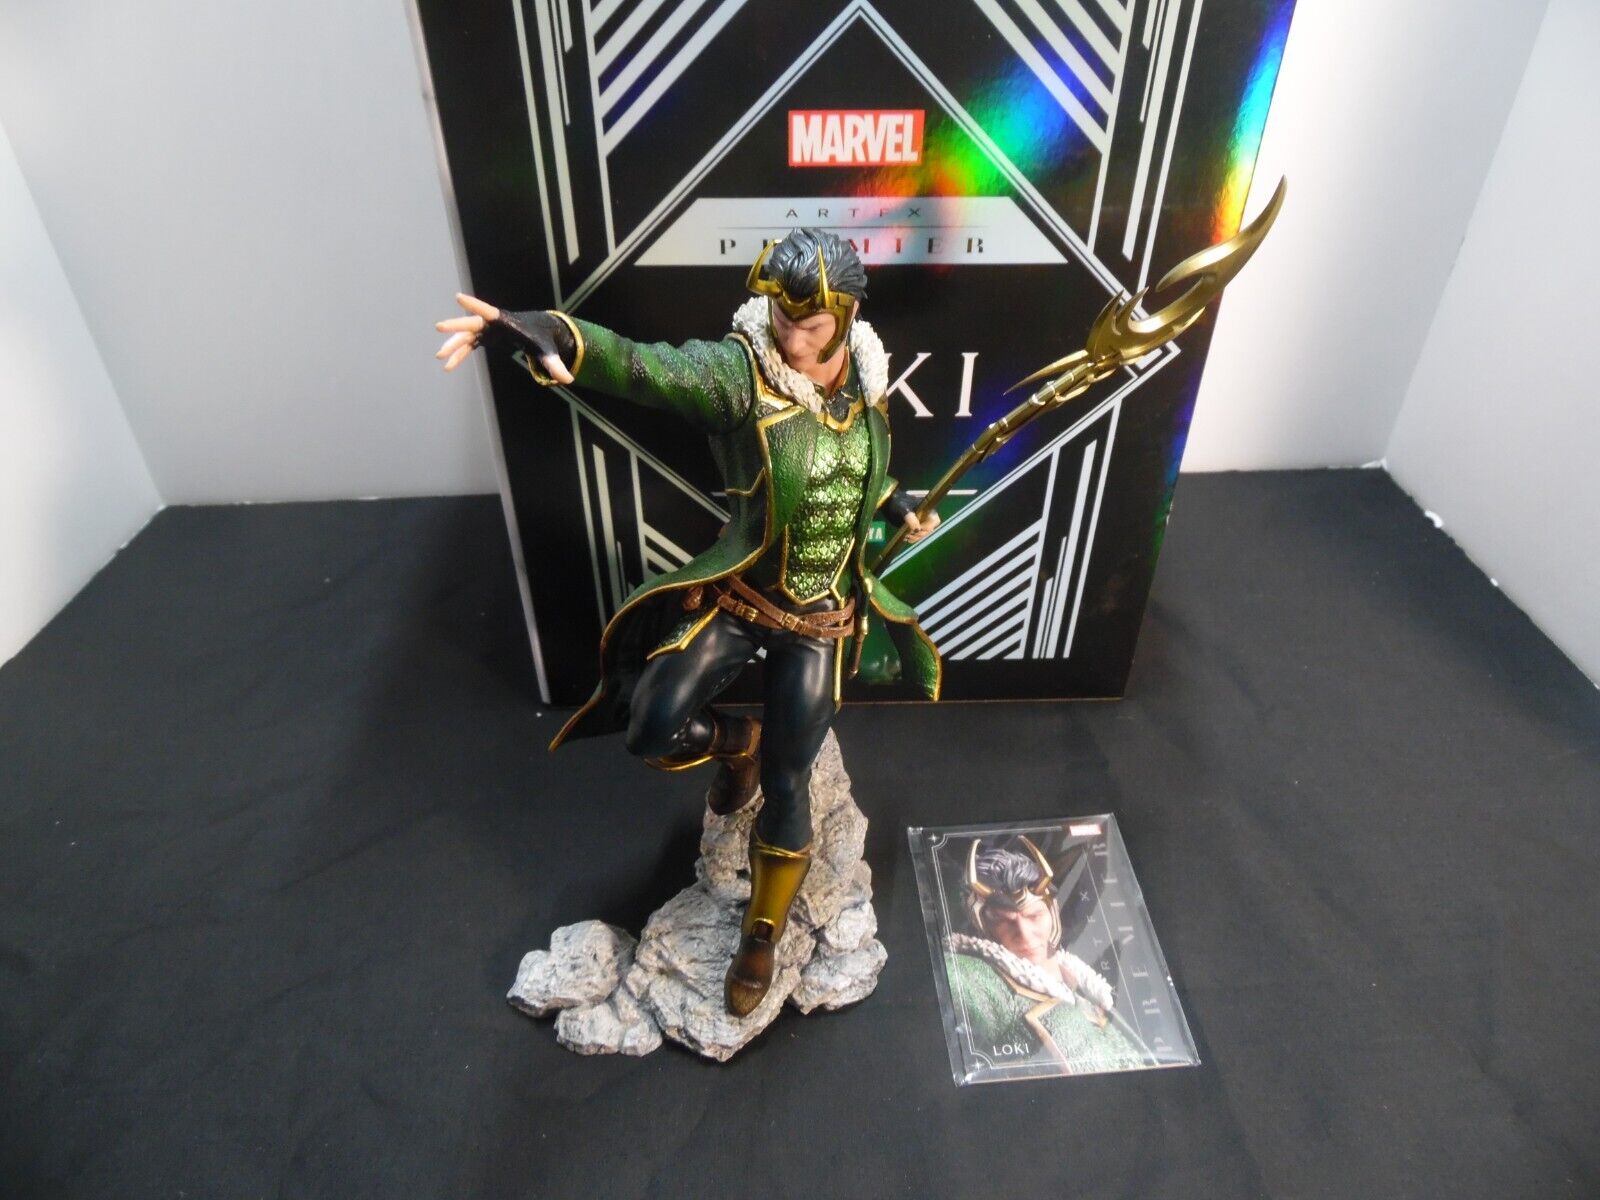 What This Fan Wants FromMarvel's Loki - LRM